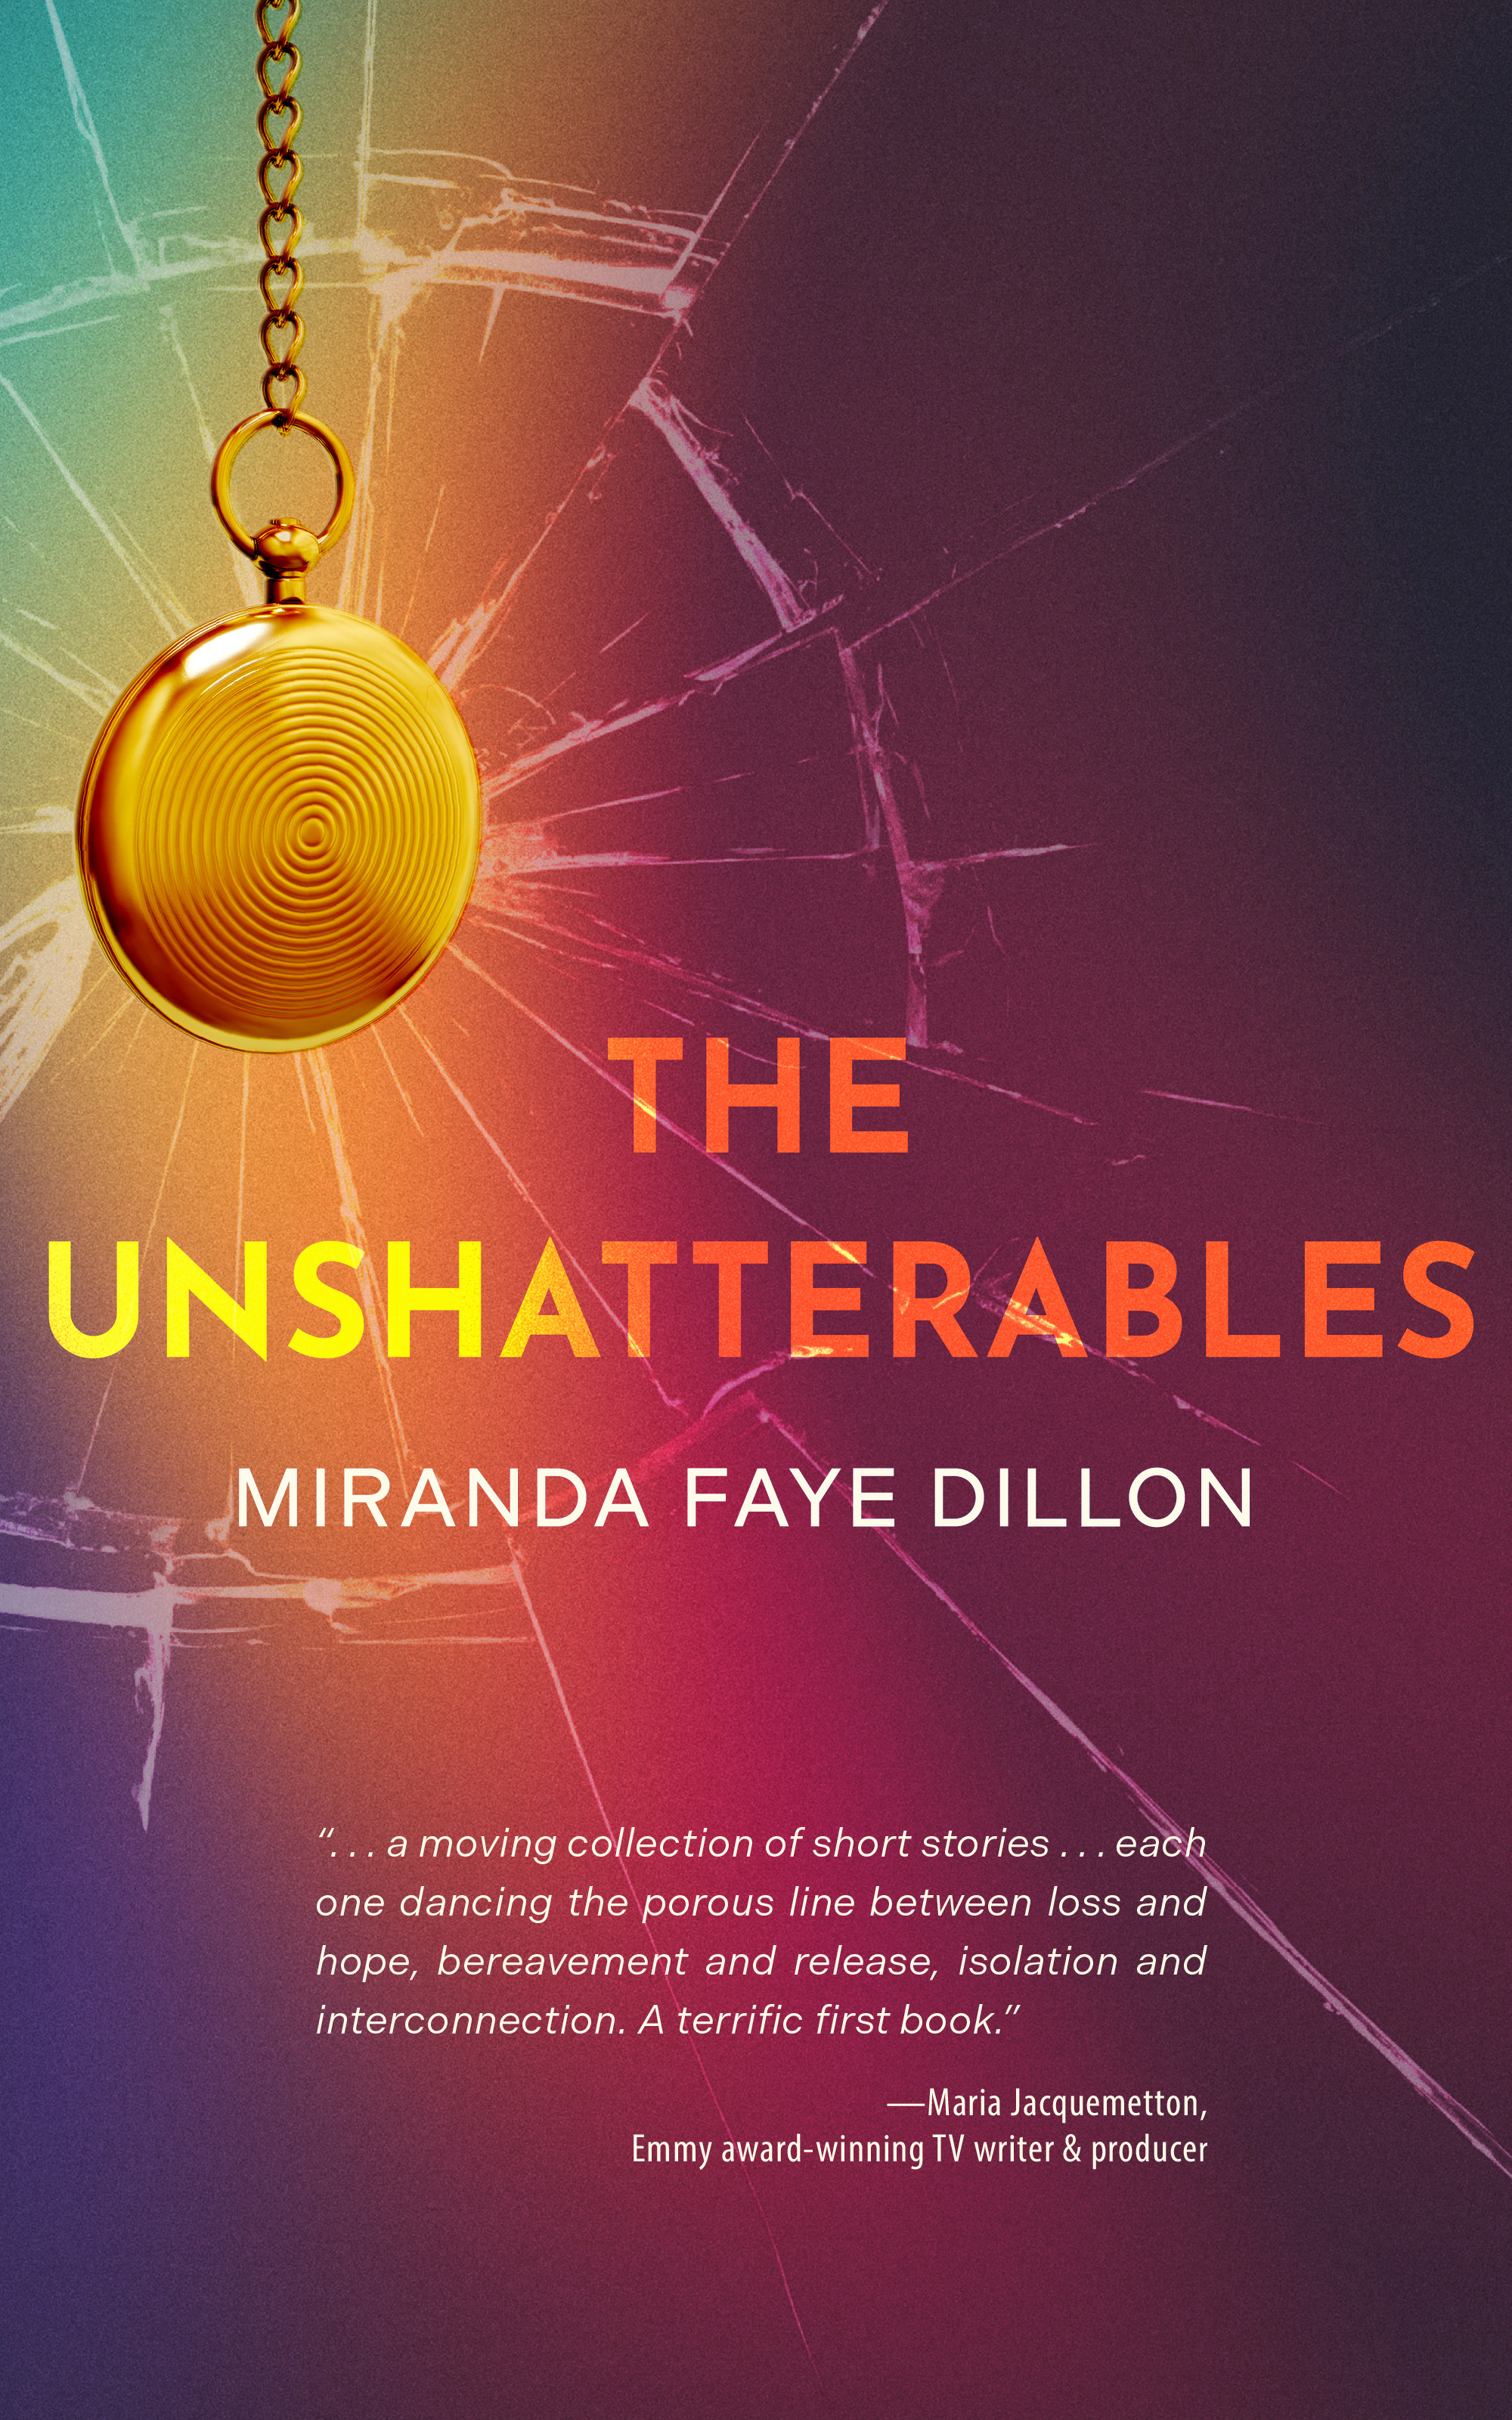 The Unshatterables by Miranda Dillon (book cover)